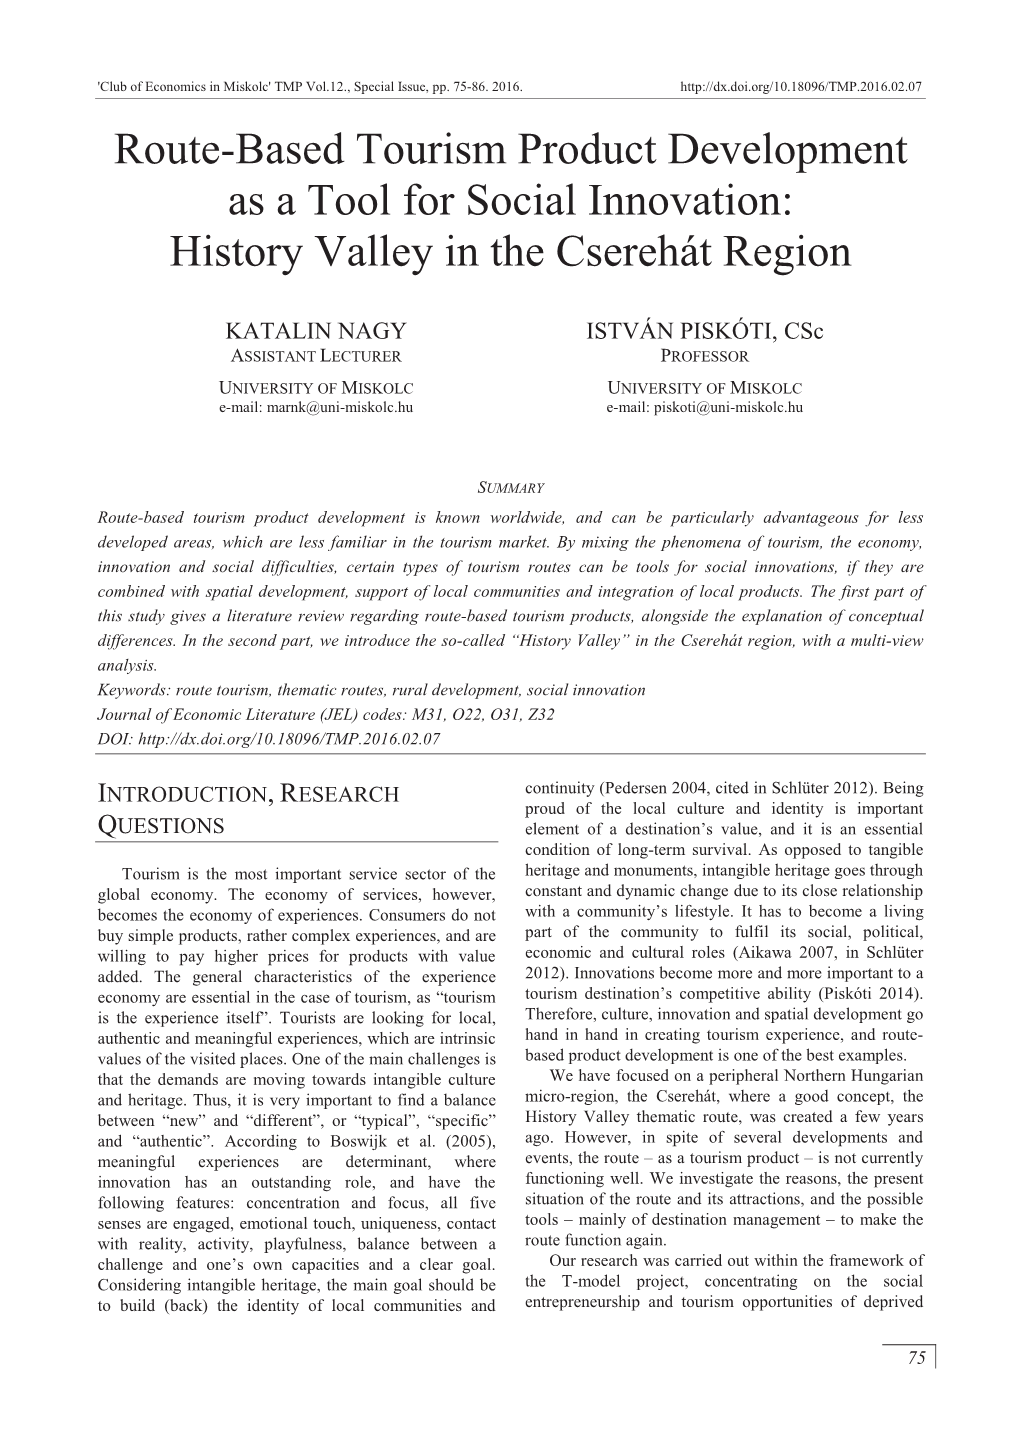 Route-Based Tourism Product Development As a Tool for Social Innovation: History Valley in the Cserehát Region